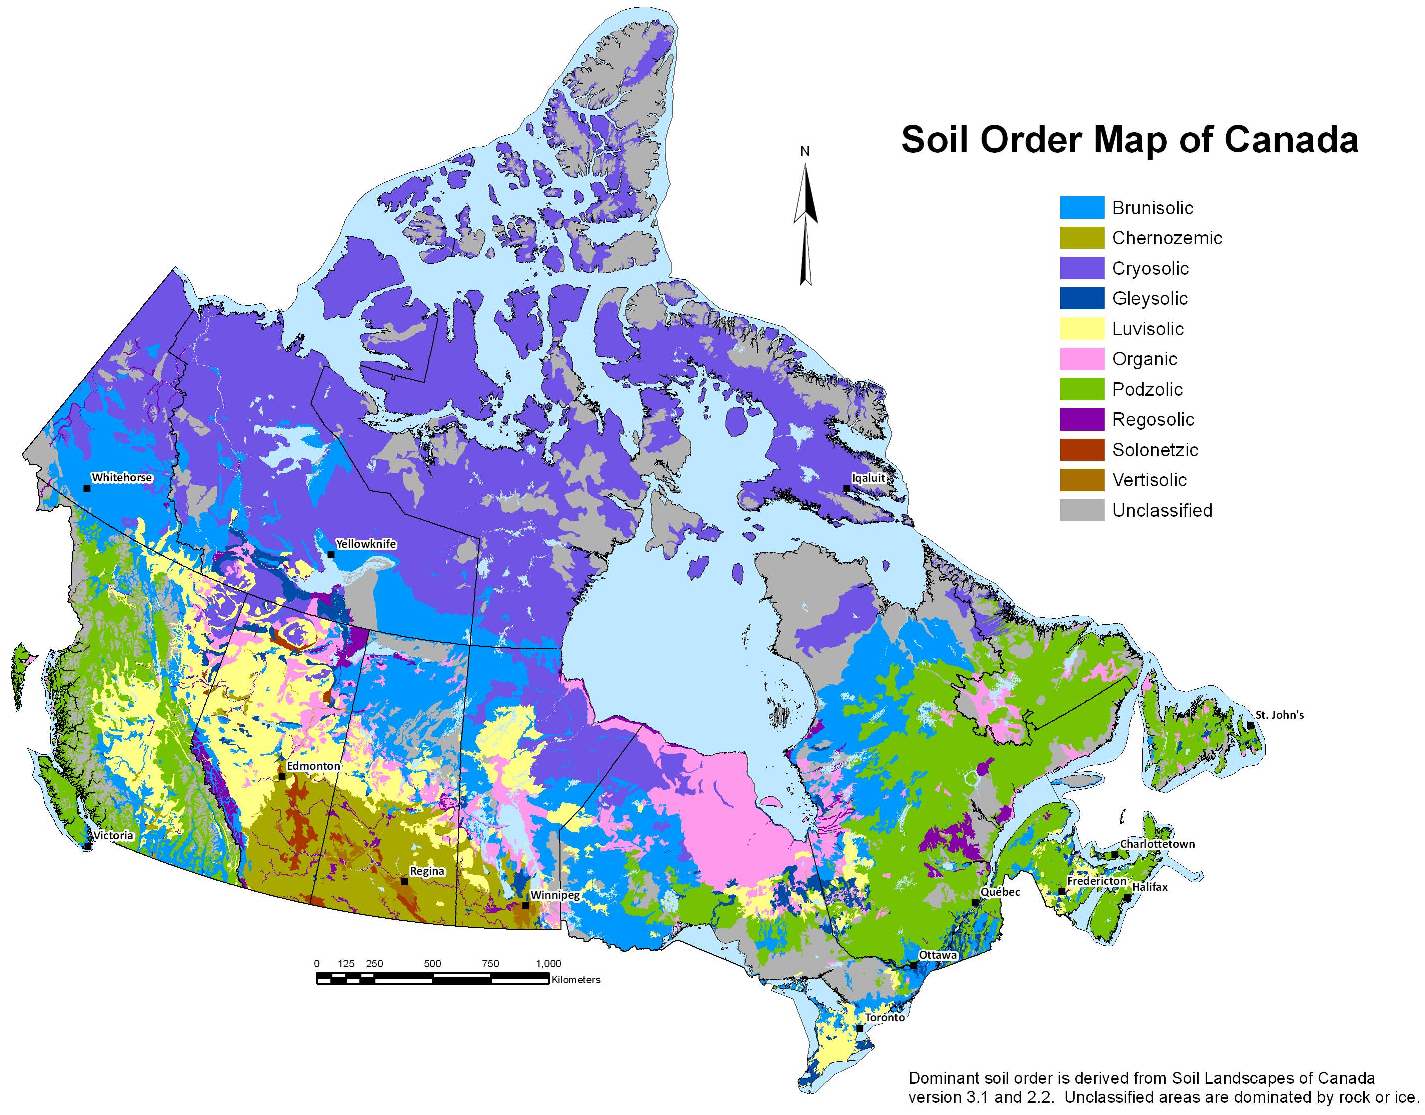 The soil order map of Canada. [from The Department of Soil Science, University of Saskatchewan, http://www.soilsofcanada.ca/ used with permission]